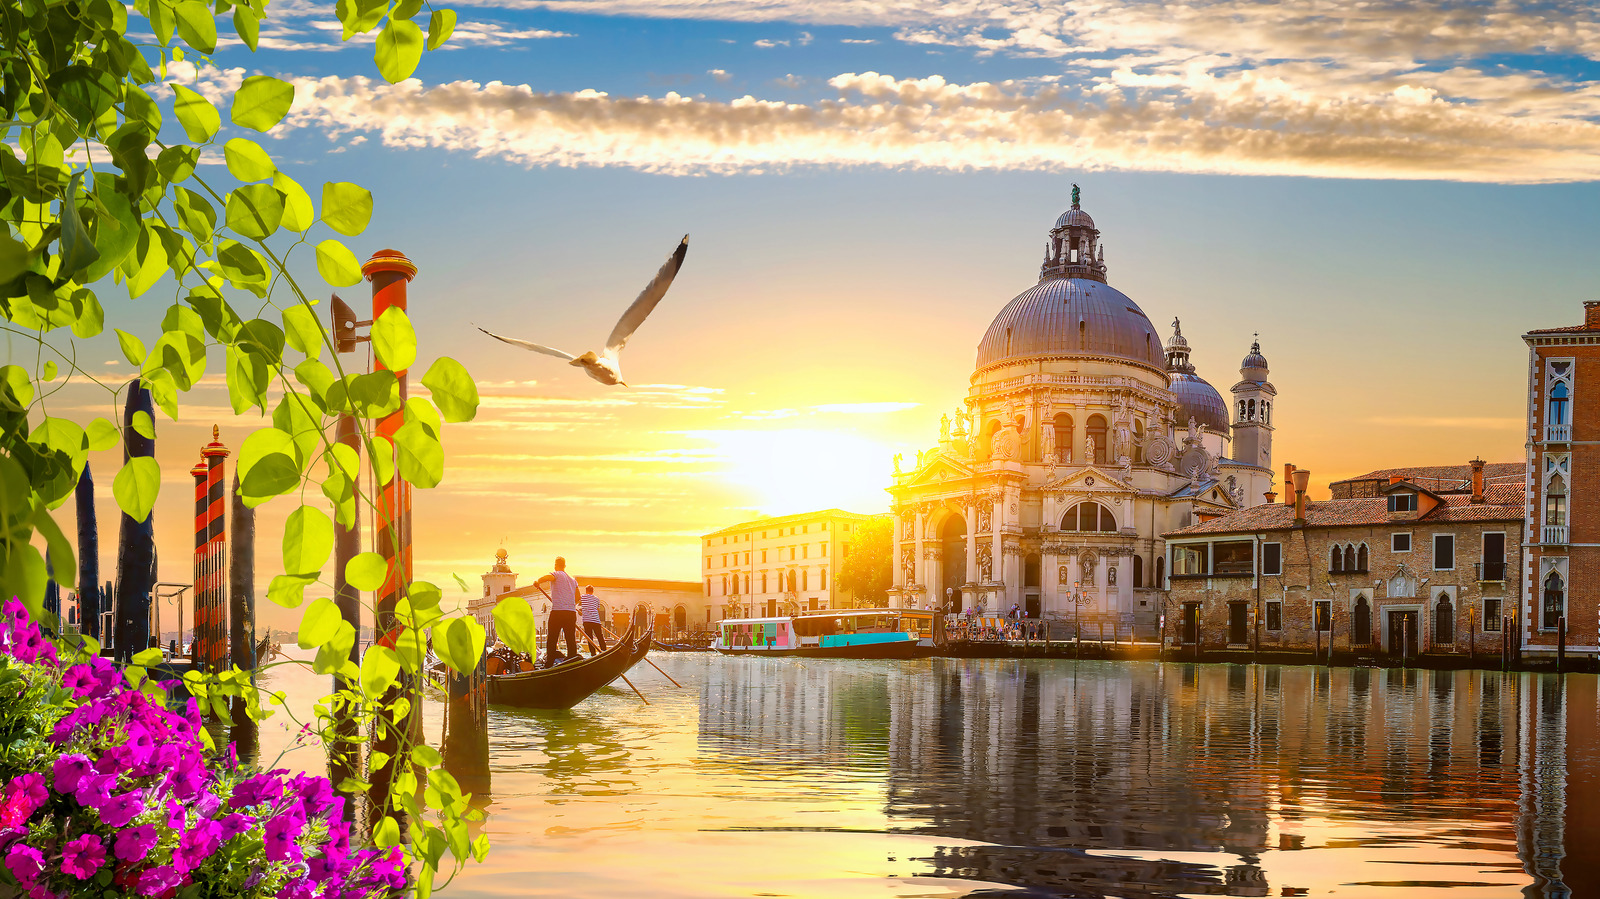 What Is The Summer Weather Like In Venice, Italy? Explore TrendRadars